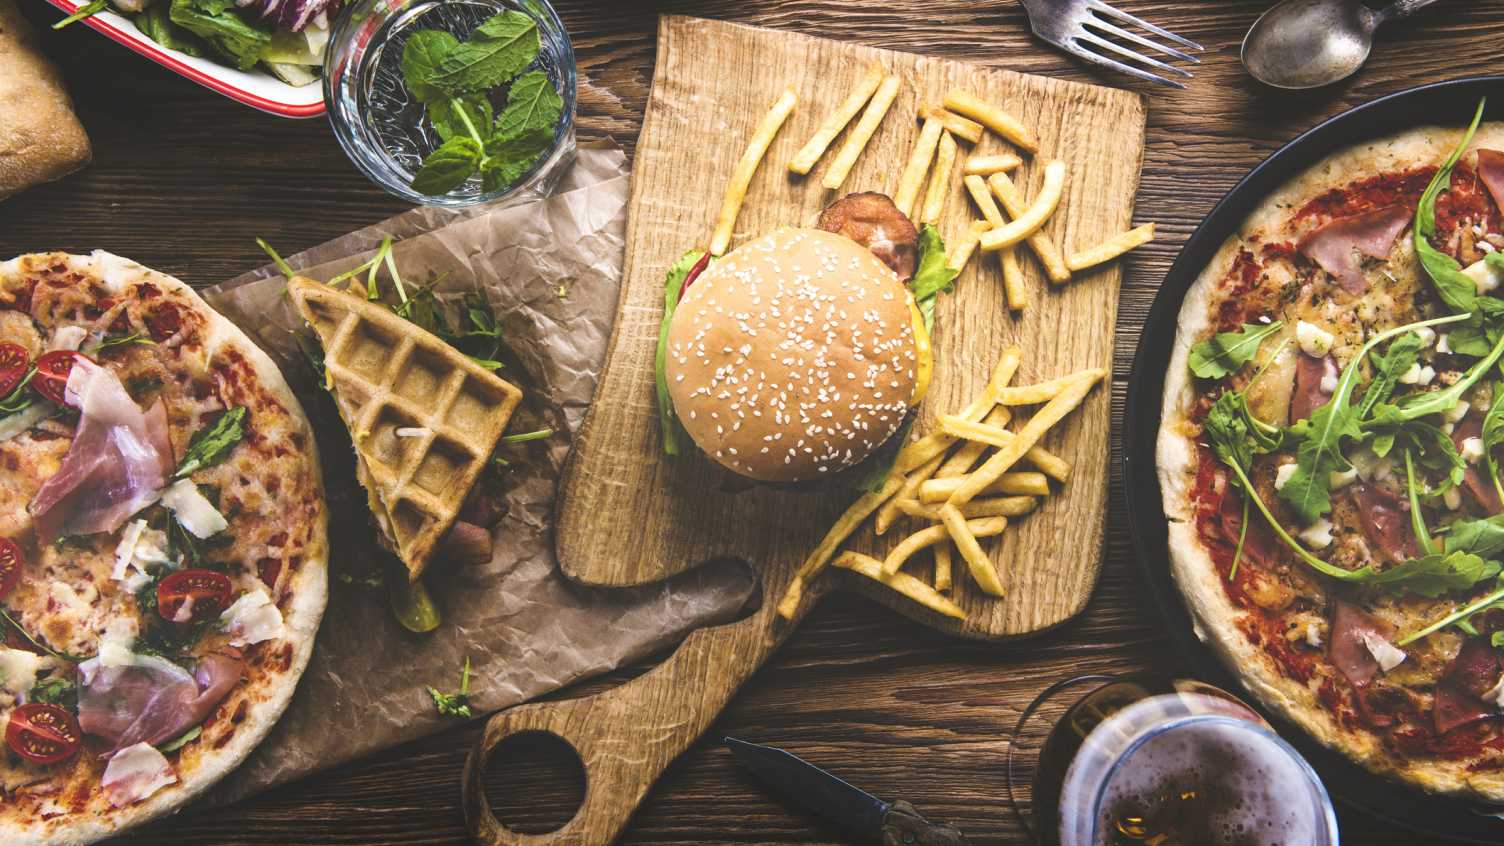 Junk food advertising restrictions prevent almost 100,000 obesity cases and is expected to save the NHS £200m | News